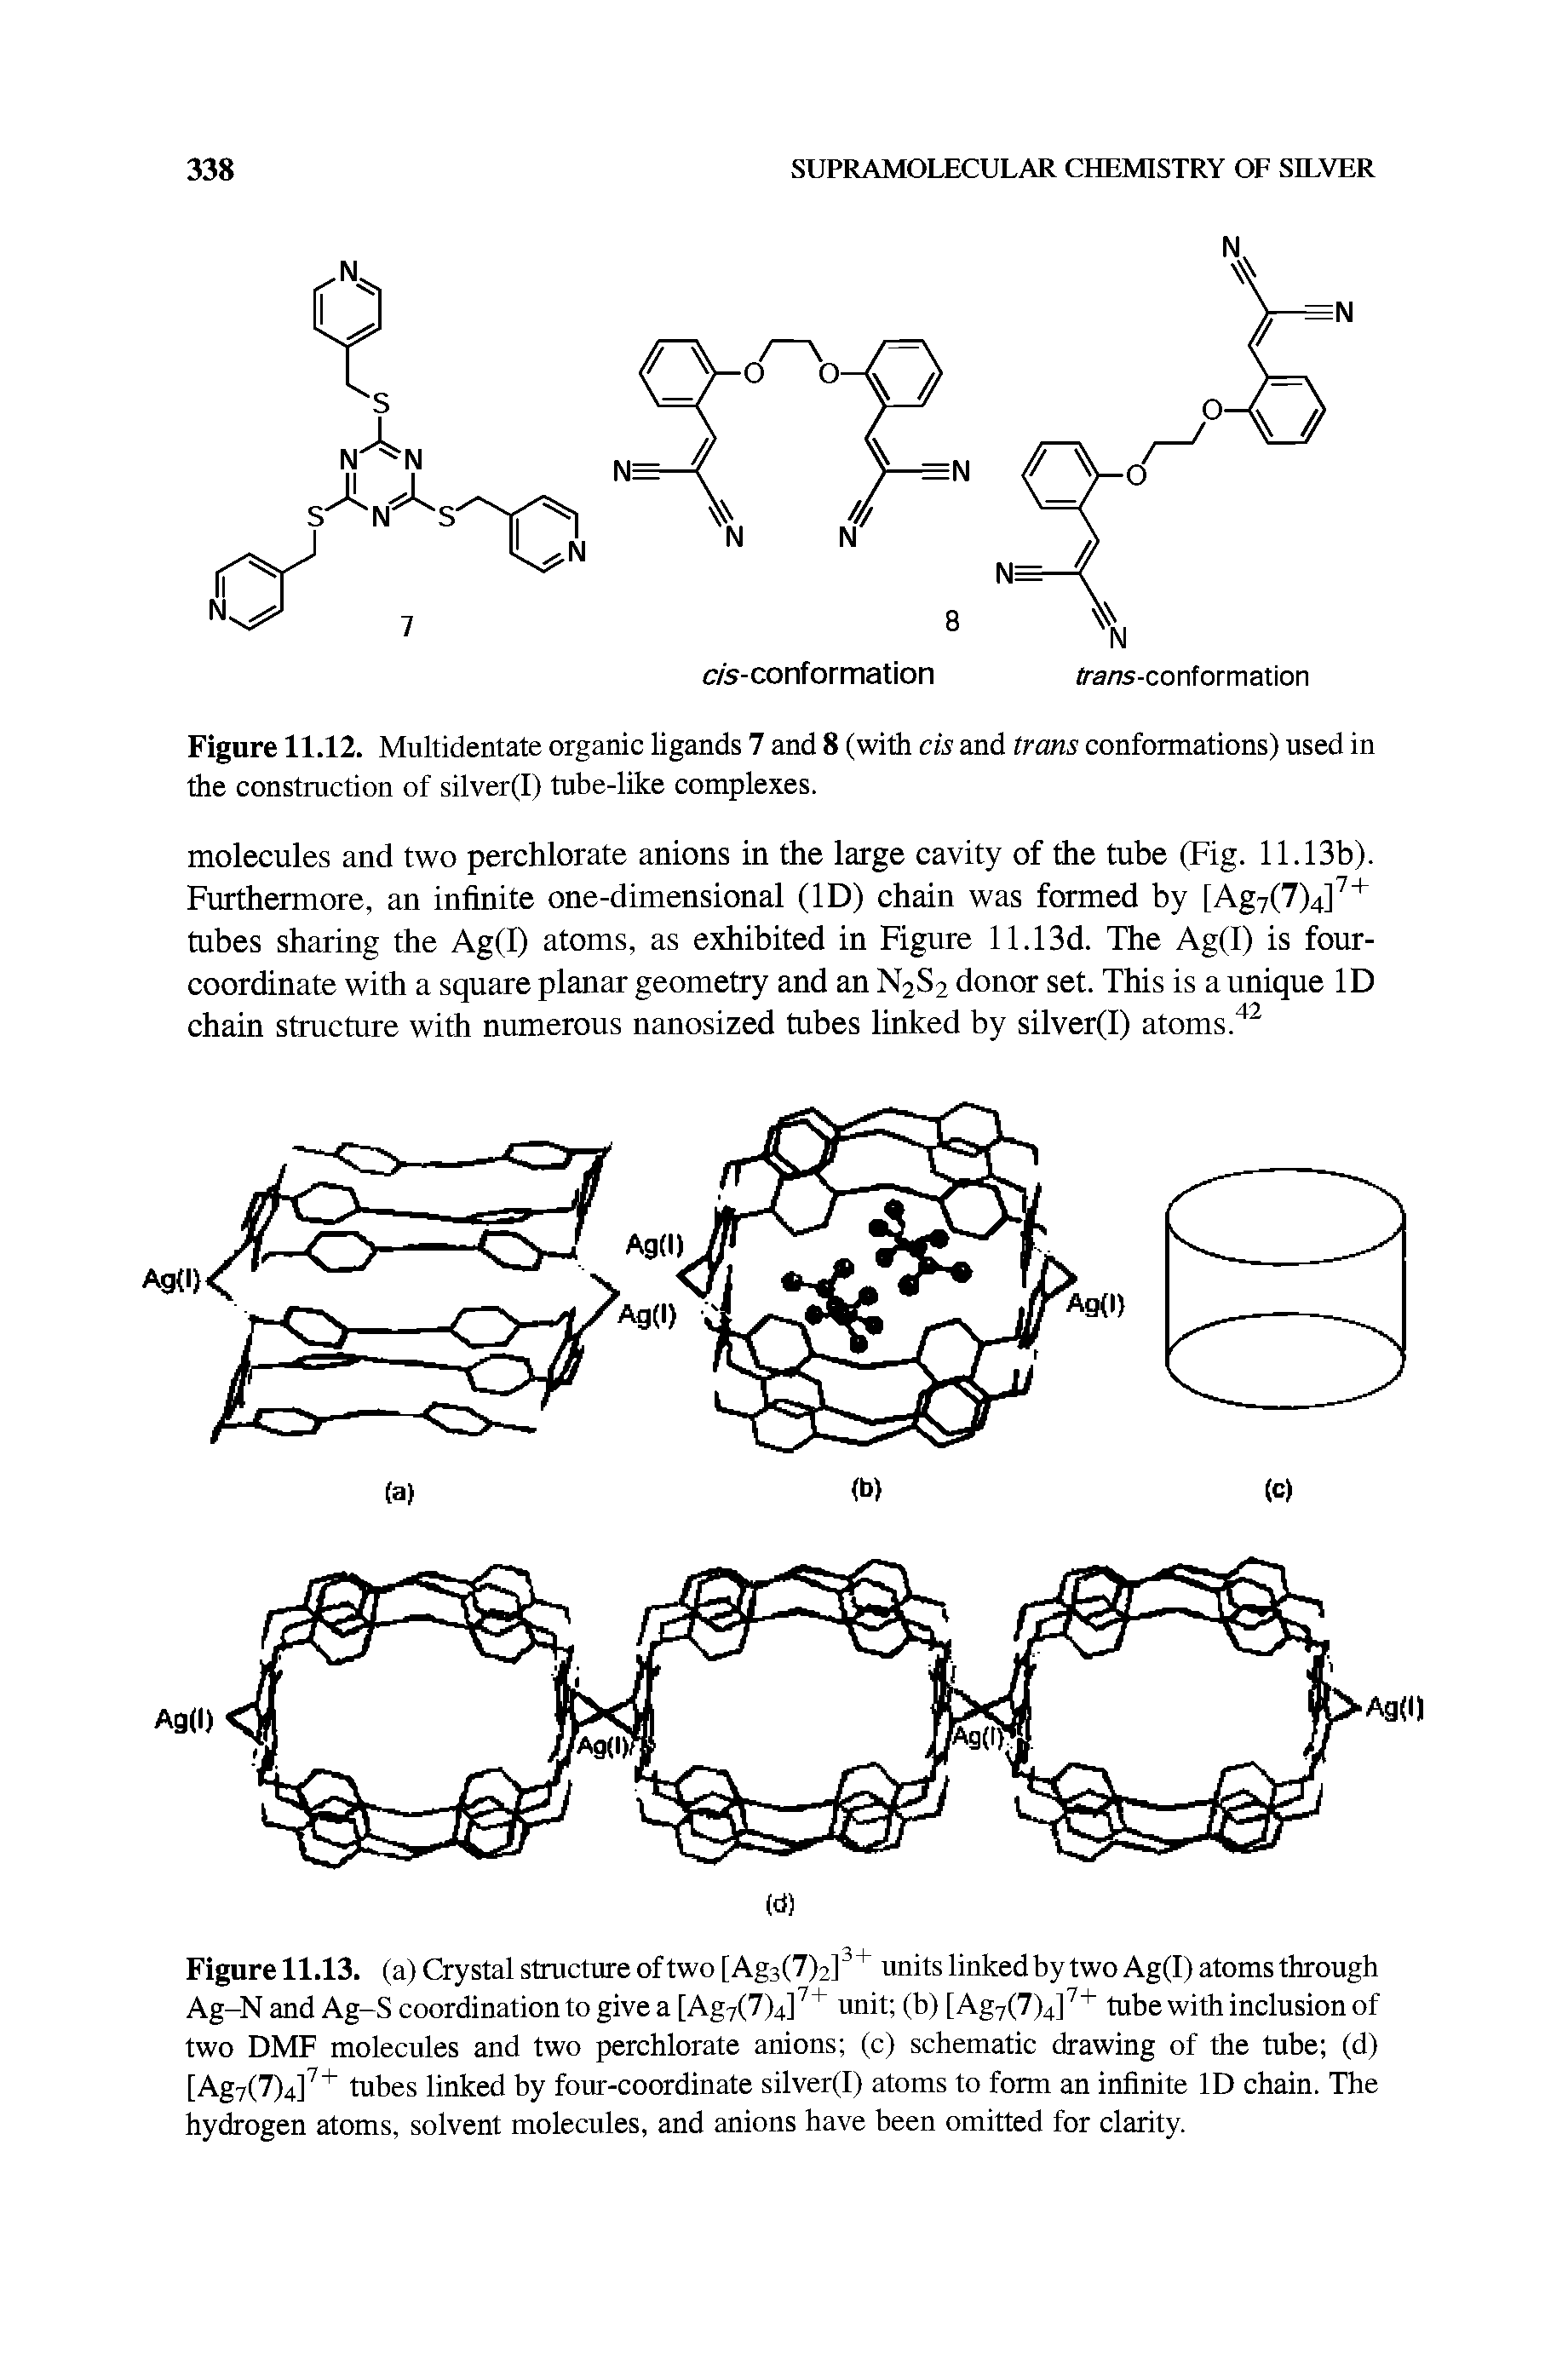 Figure 11.12. Multidentate organic ligands 7 and 8 (with cis and trans conformations) used in the construction of silver(I) tube-like complexes.